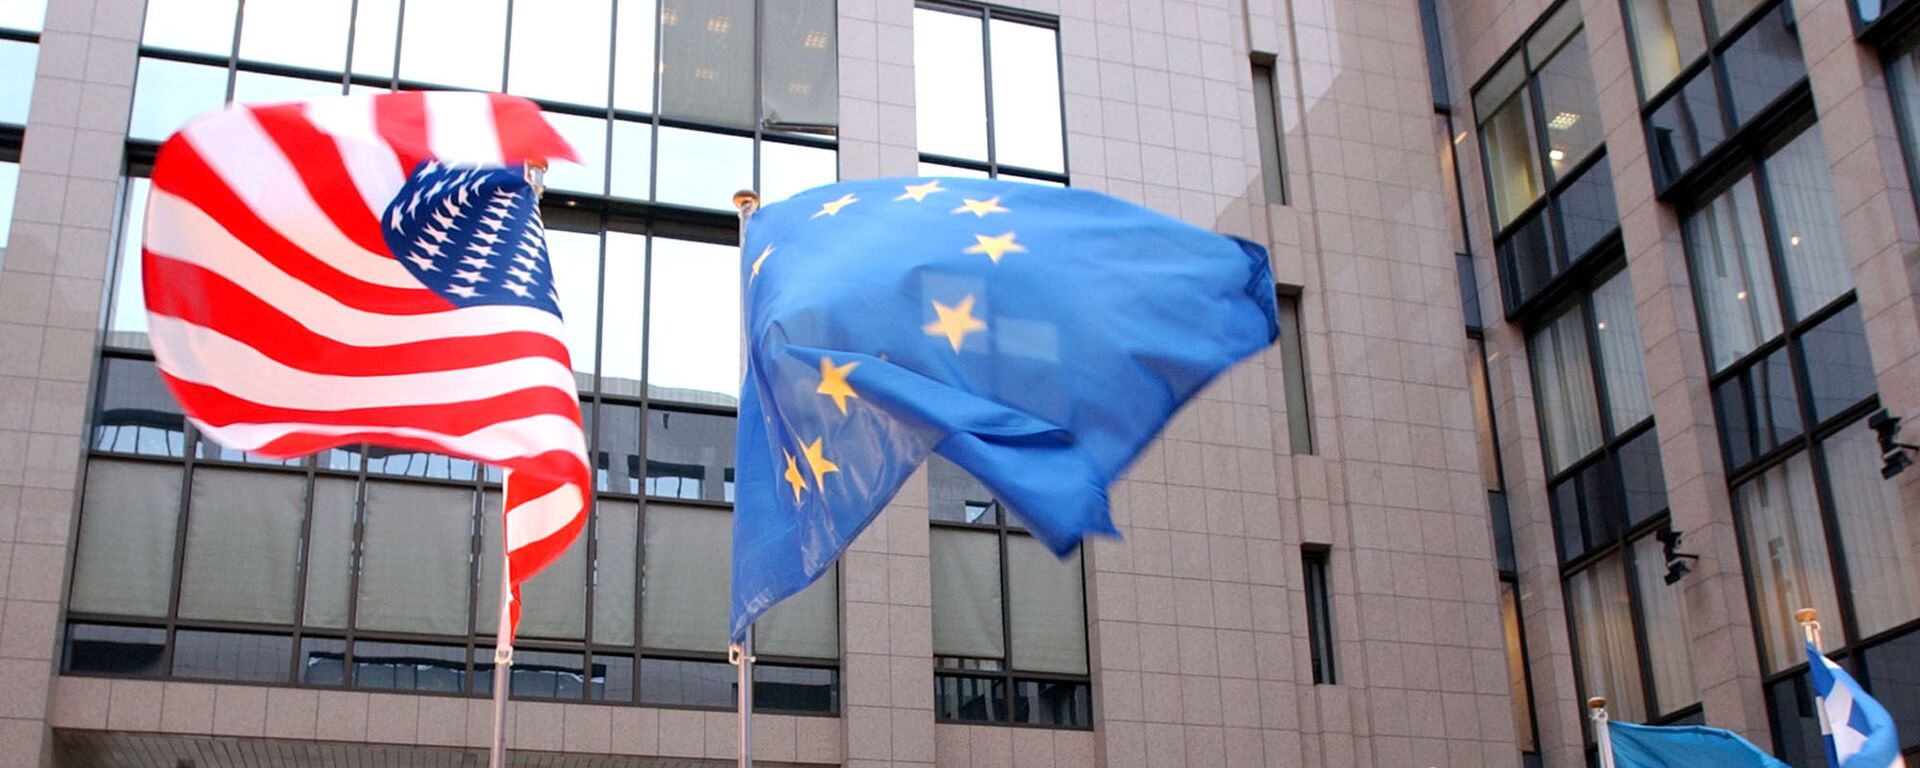 The US and EU flags, top left and right, fly in separate directions at the European Council building in Brussels - Sputnik Moldova-România, 1920, 20.12.2021